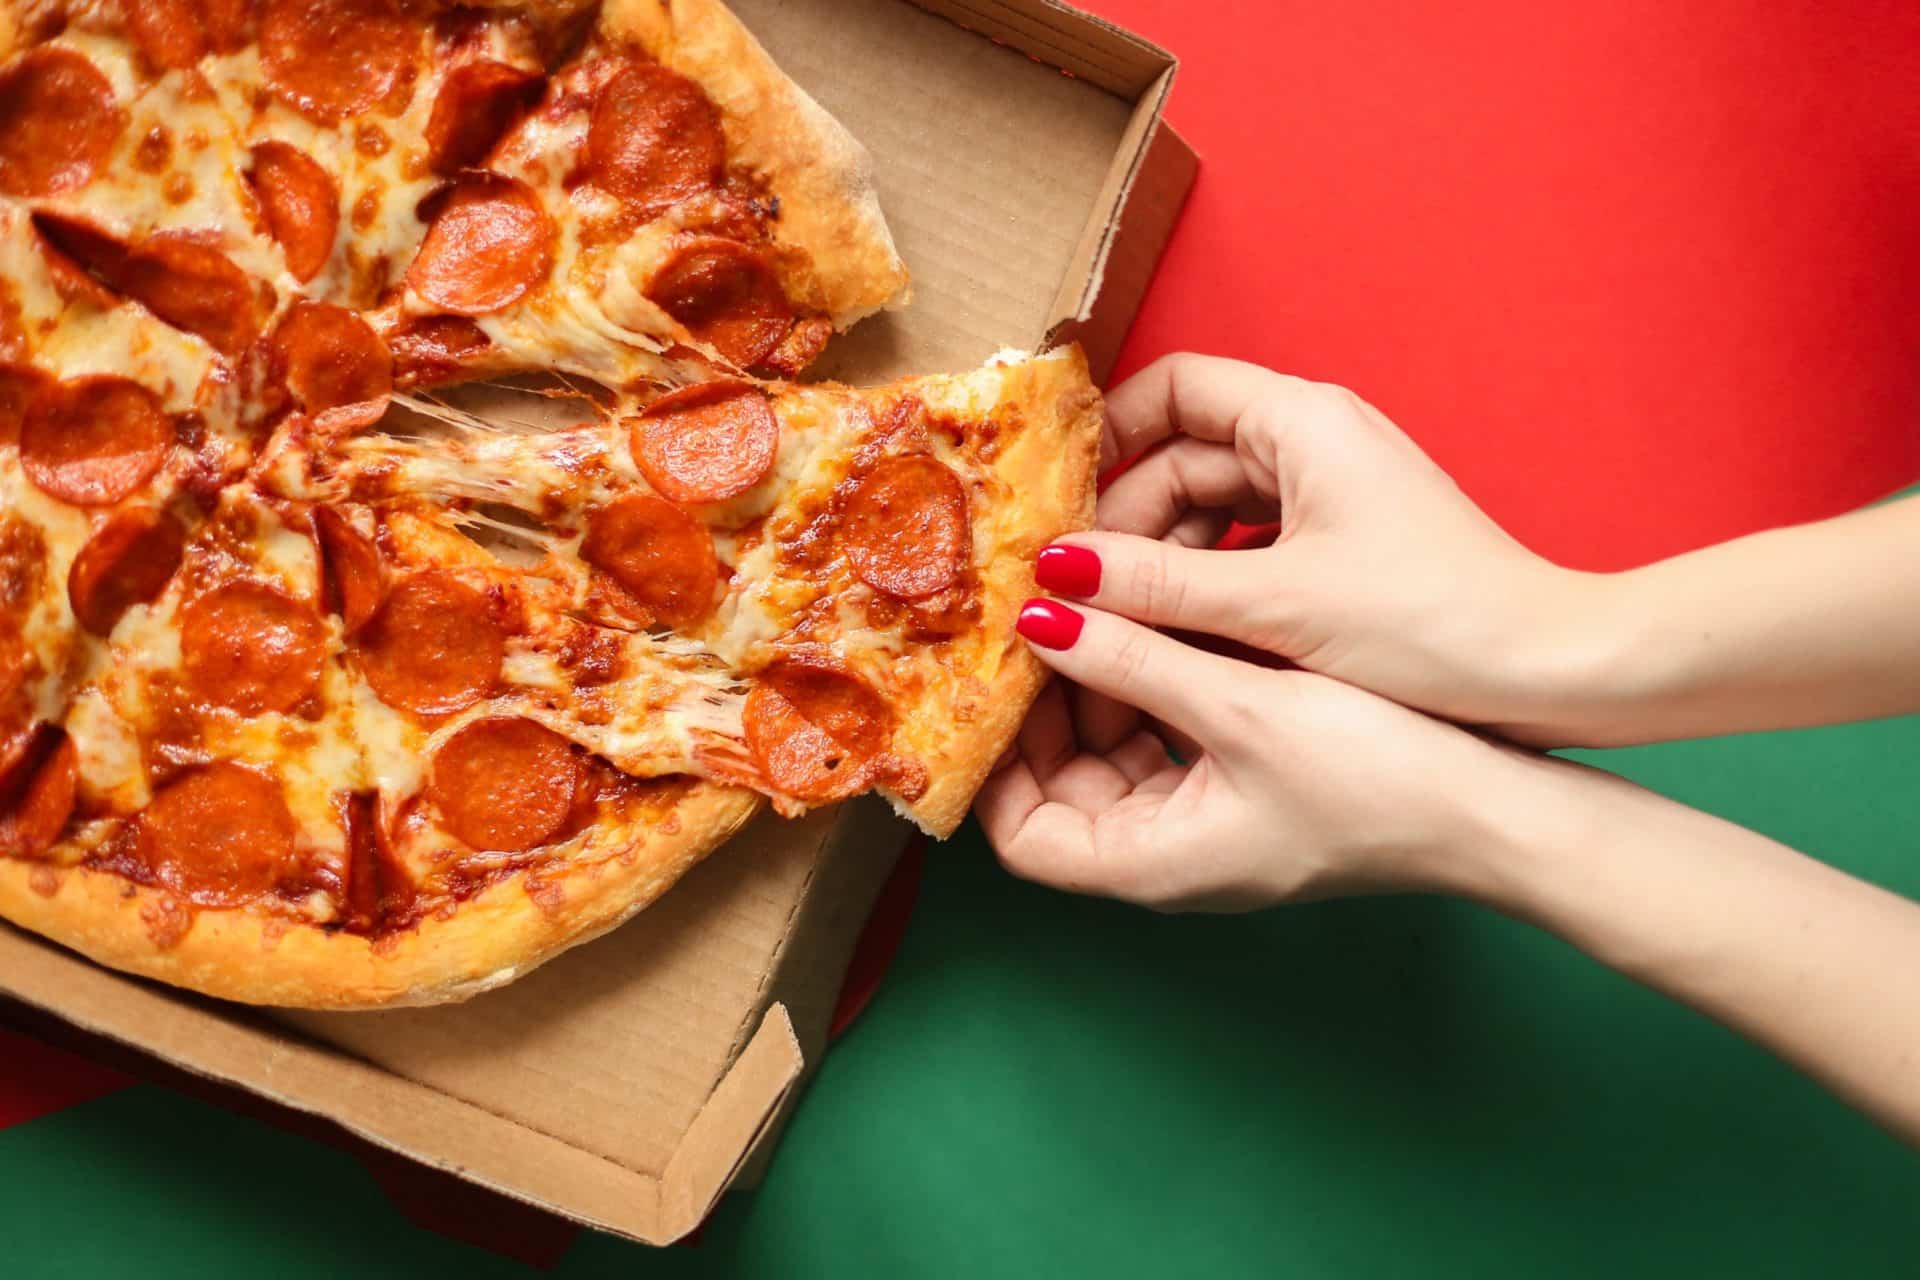 How Many Calories In a Slice Of Pizza?